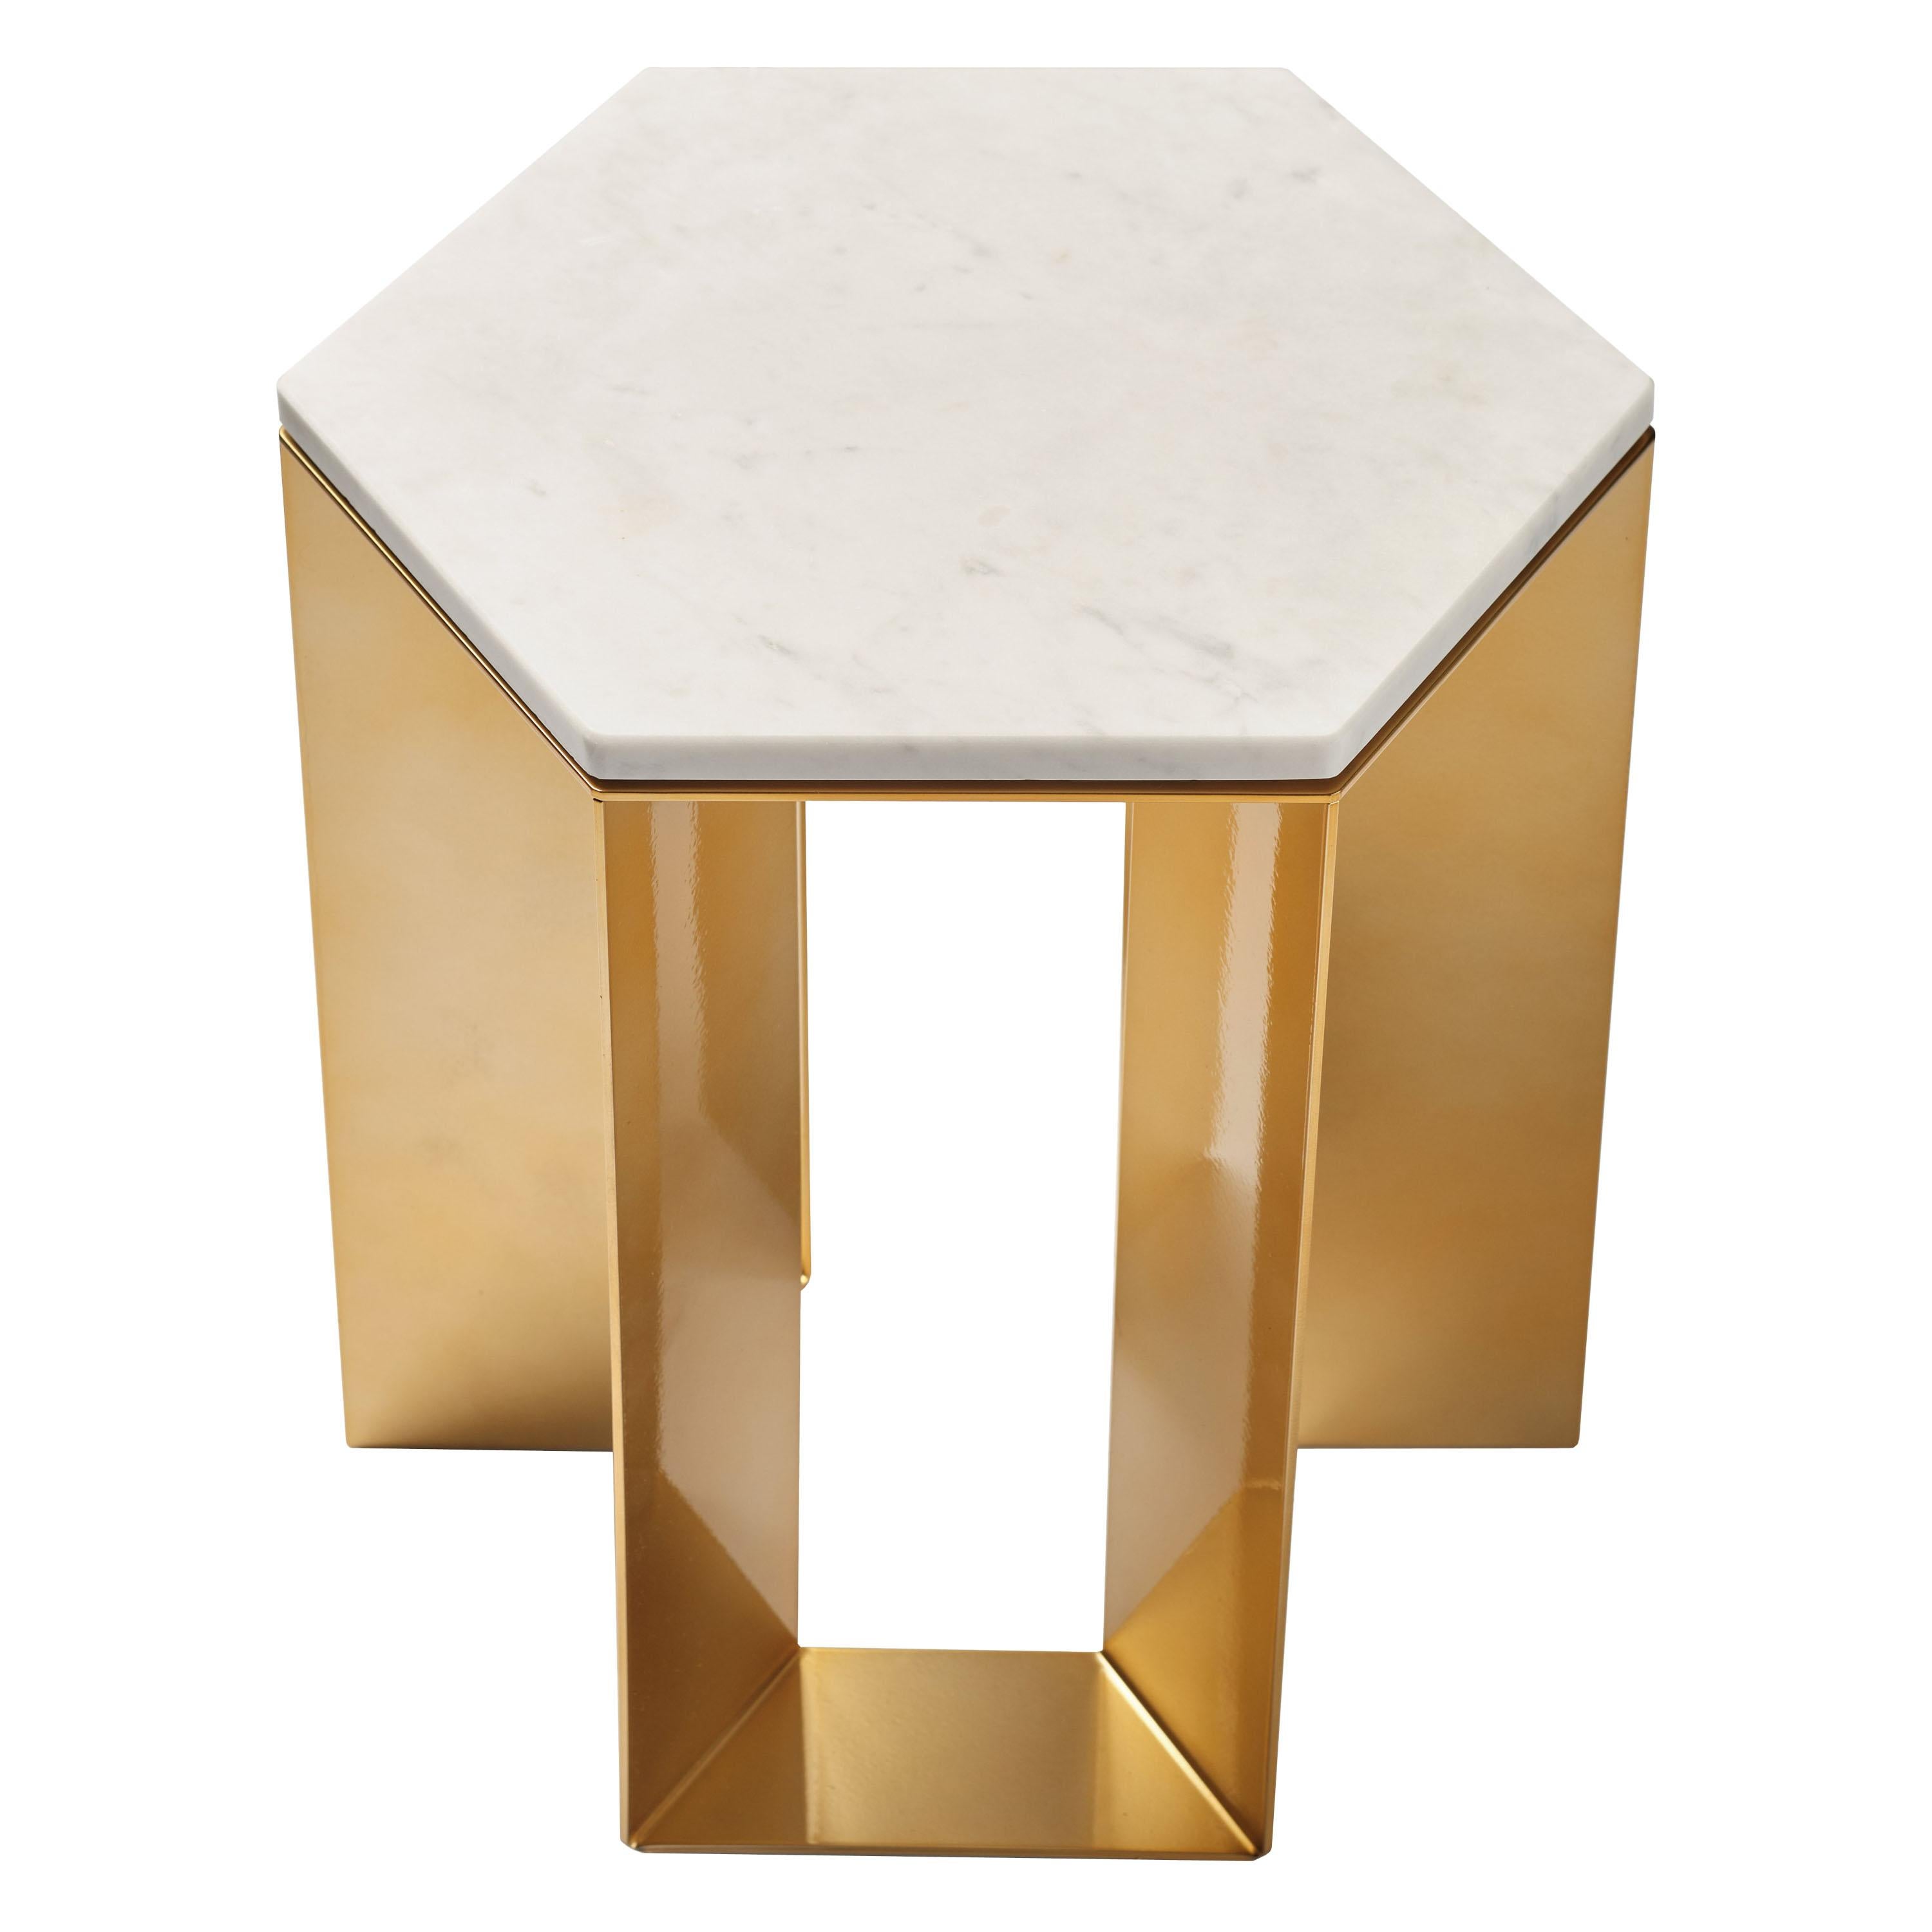 "Alato" Modern Metal Side Table with Shiny Gold Chrome and White Marble Top For Sale